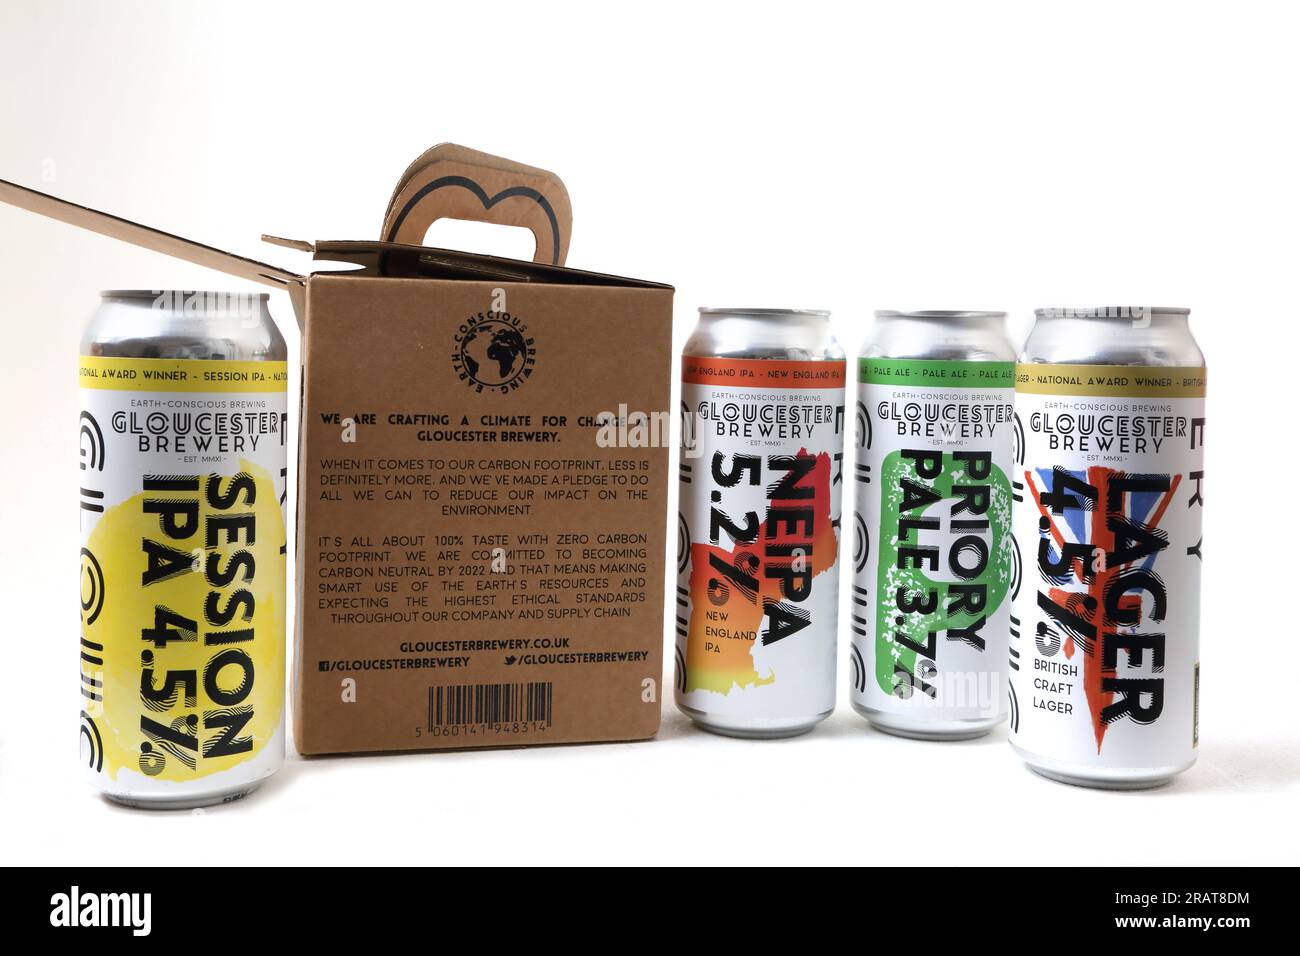 Gloucester Brewery Beer, Lager and Ale Earth Conscious Brewing  aiming for Zero Carbon Footprint Four Pack Gift Set Stock Photo